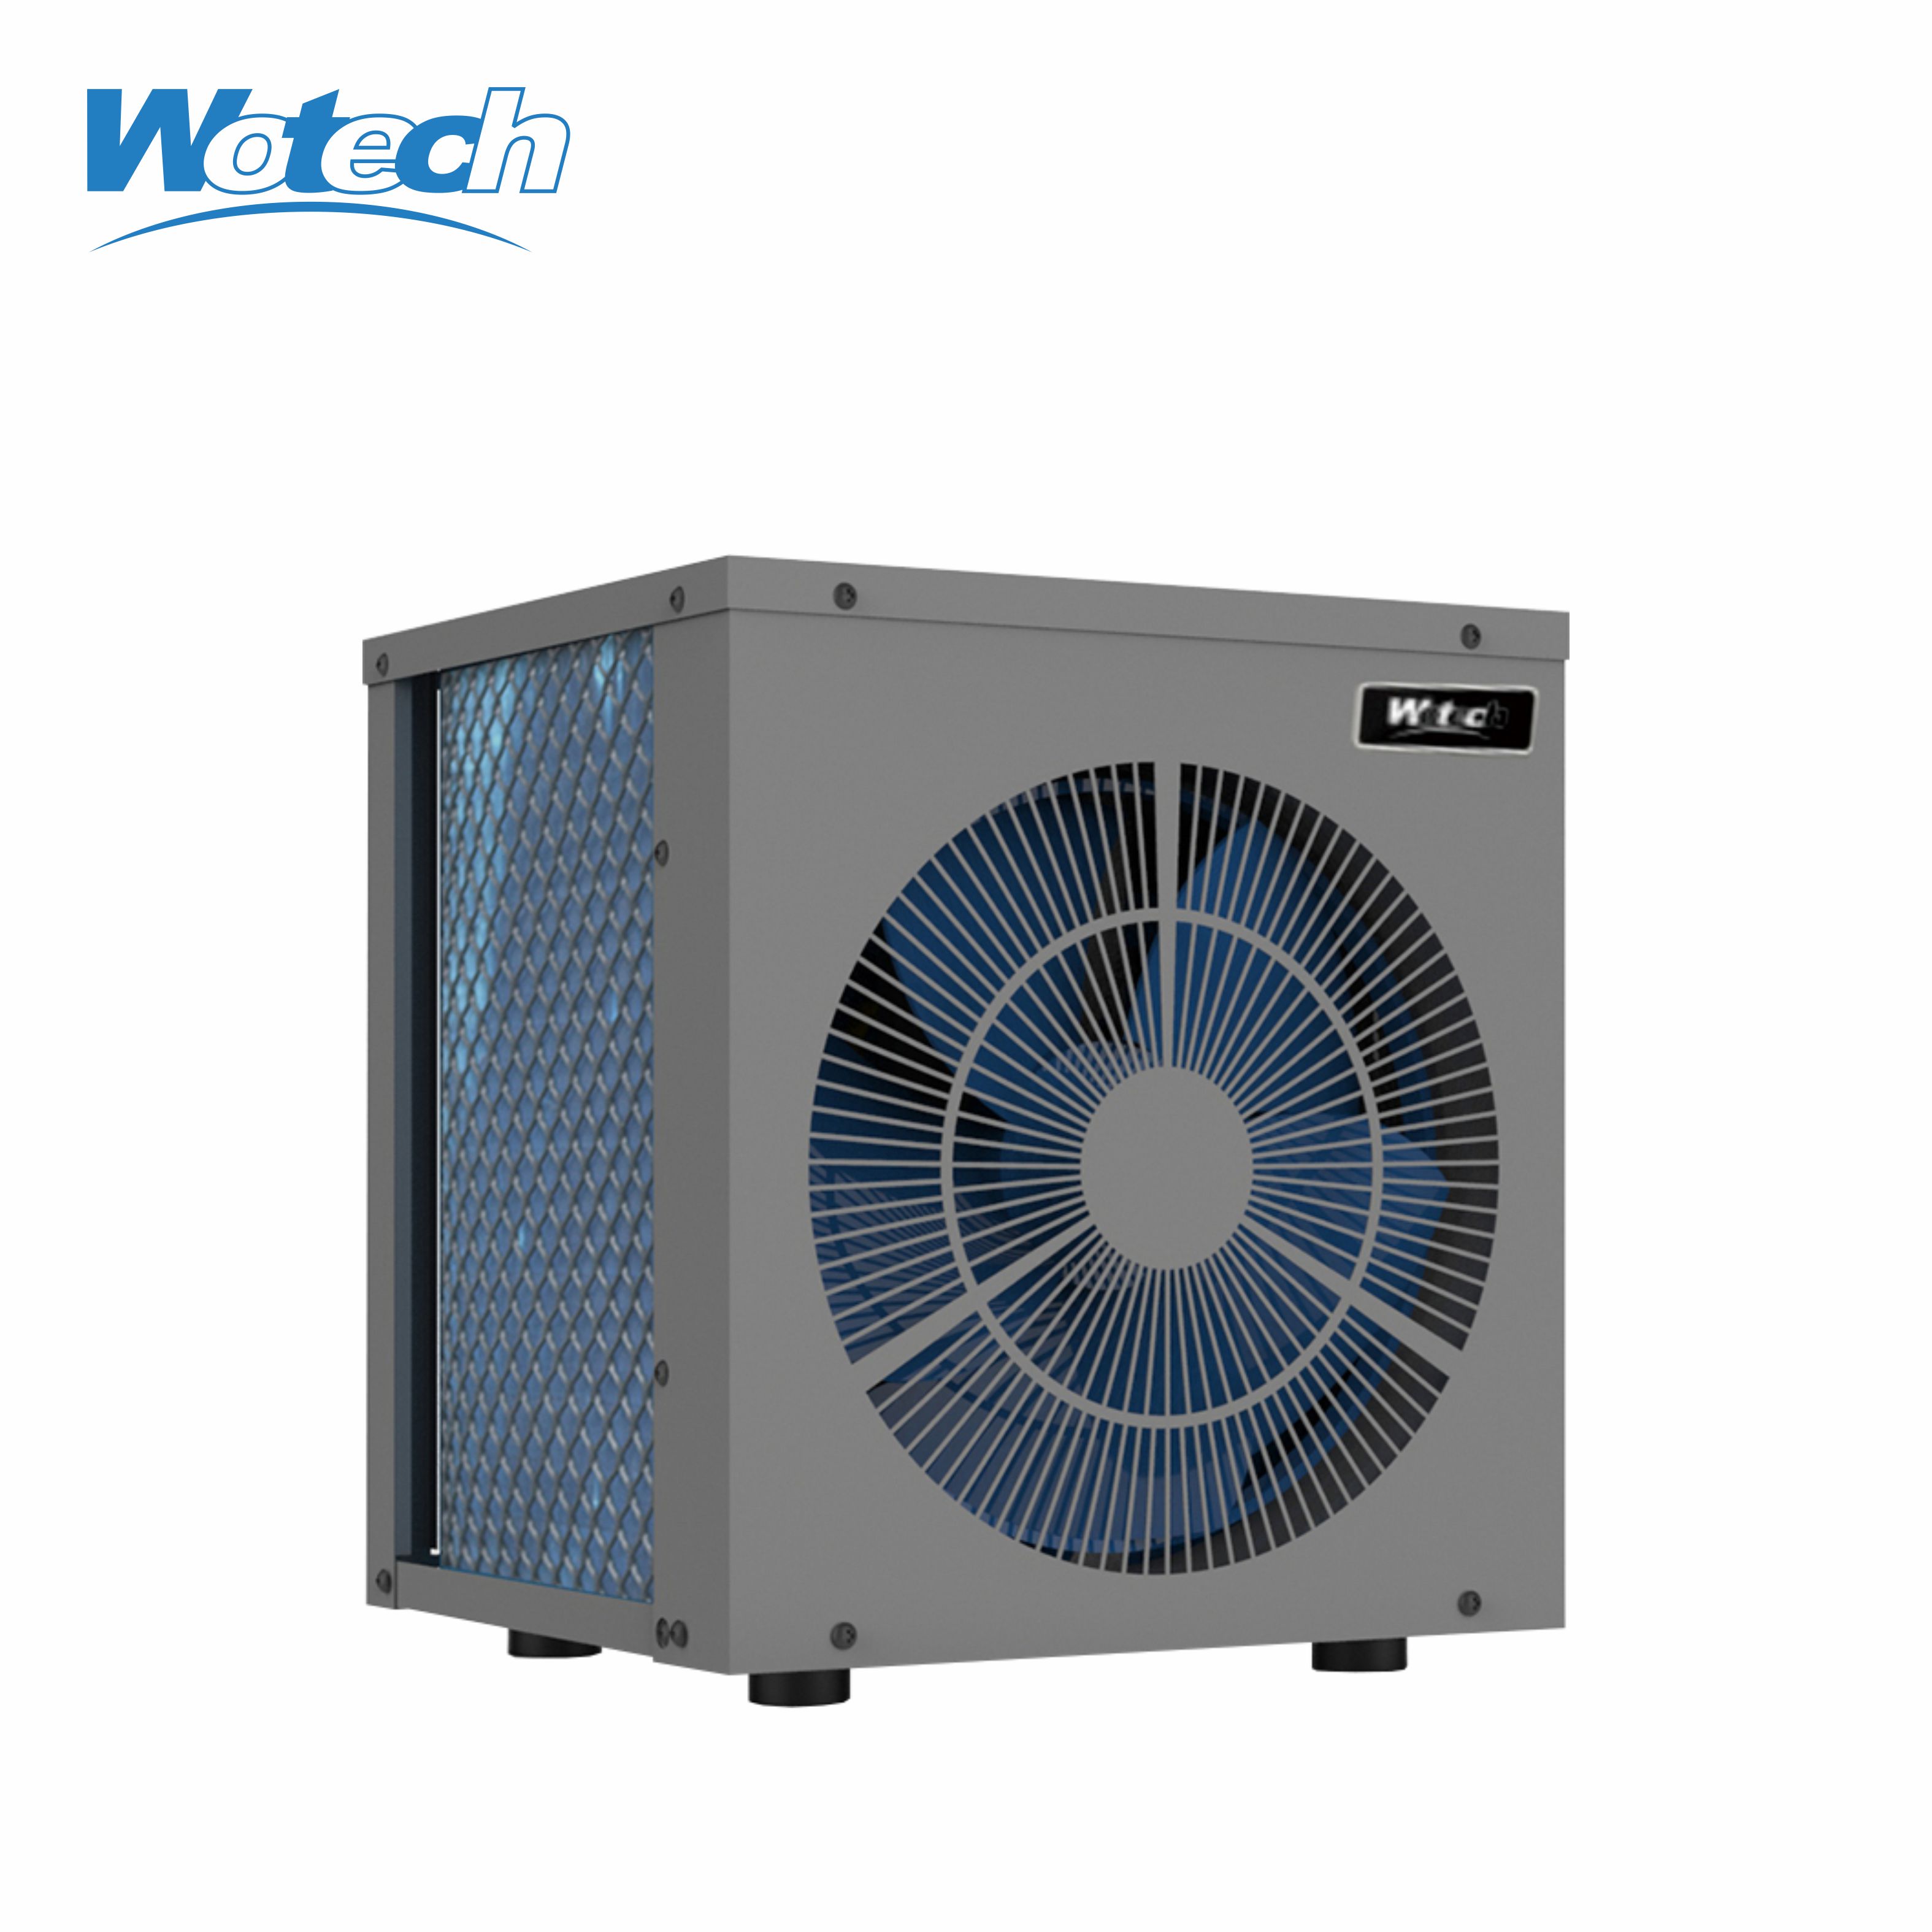 Small-Sized Swimming Pool Heat Pump for Child